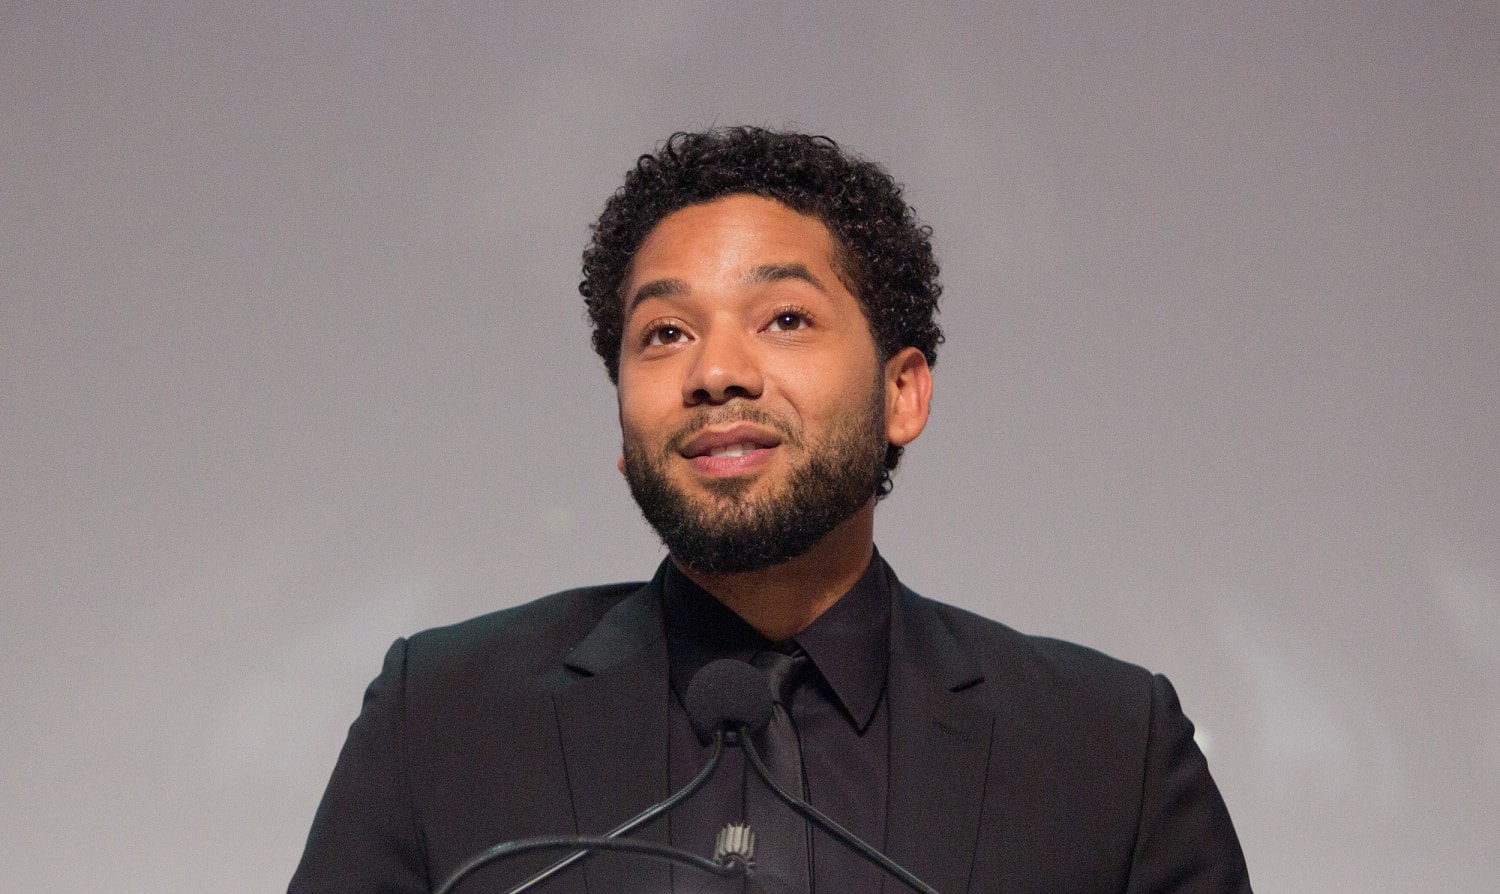 Jussie Smollett charged with felony for alleged false report of hate-crime attack